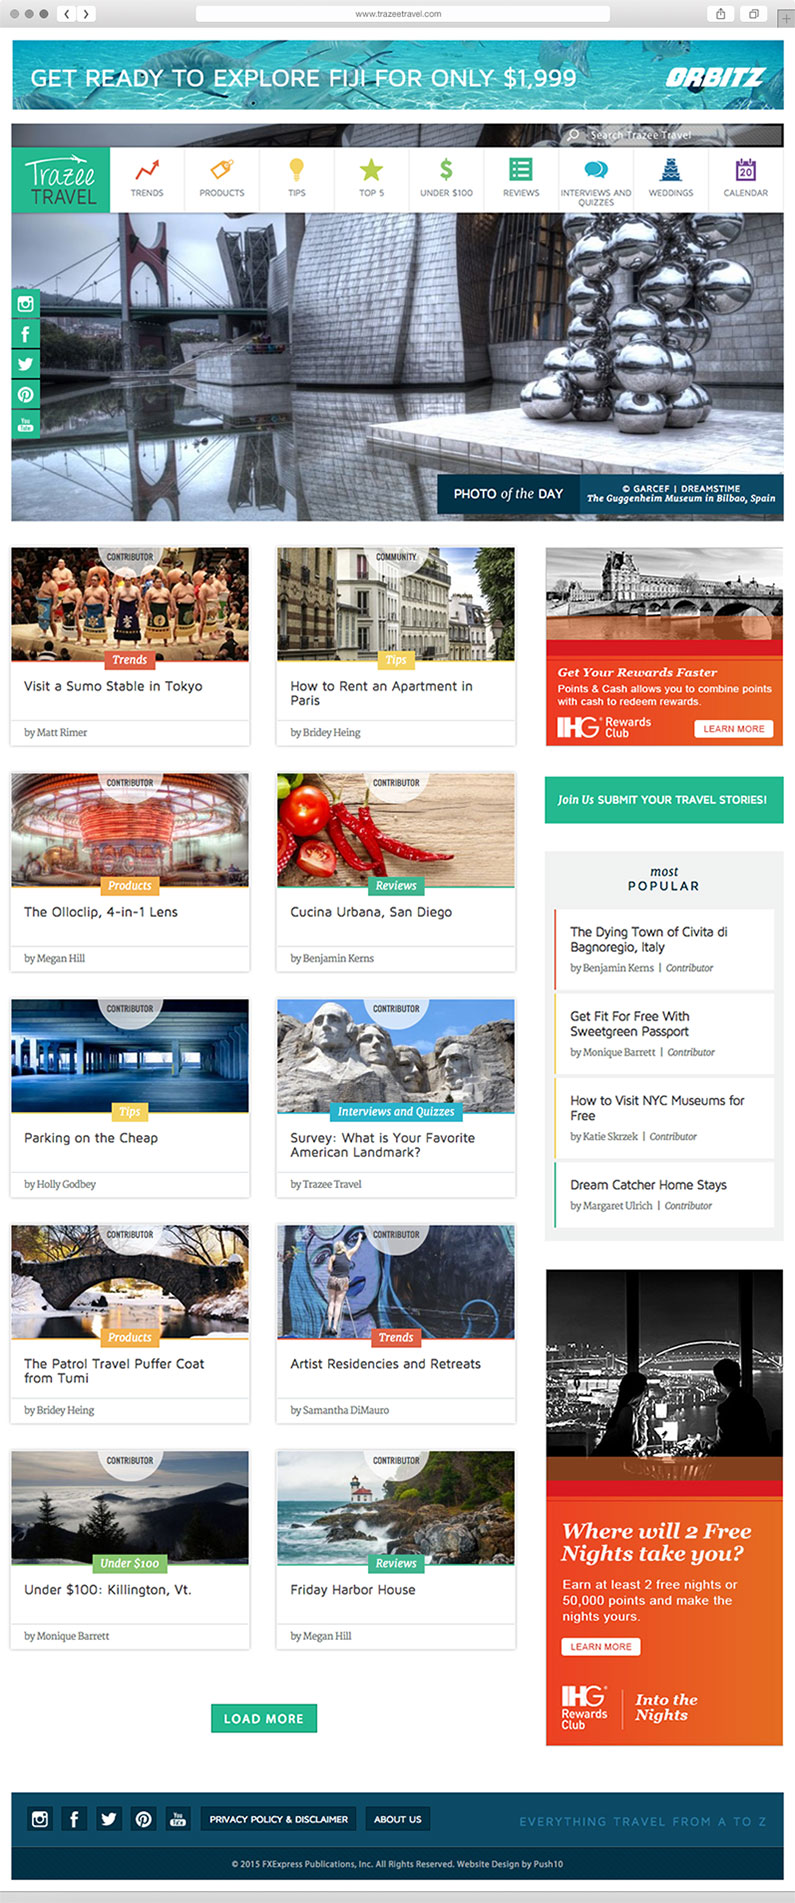 Custom designed post styles for blogs and articles for a trendy travel website by Push10.